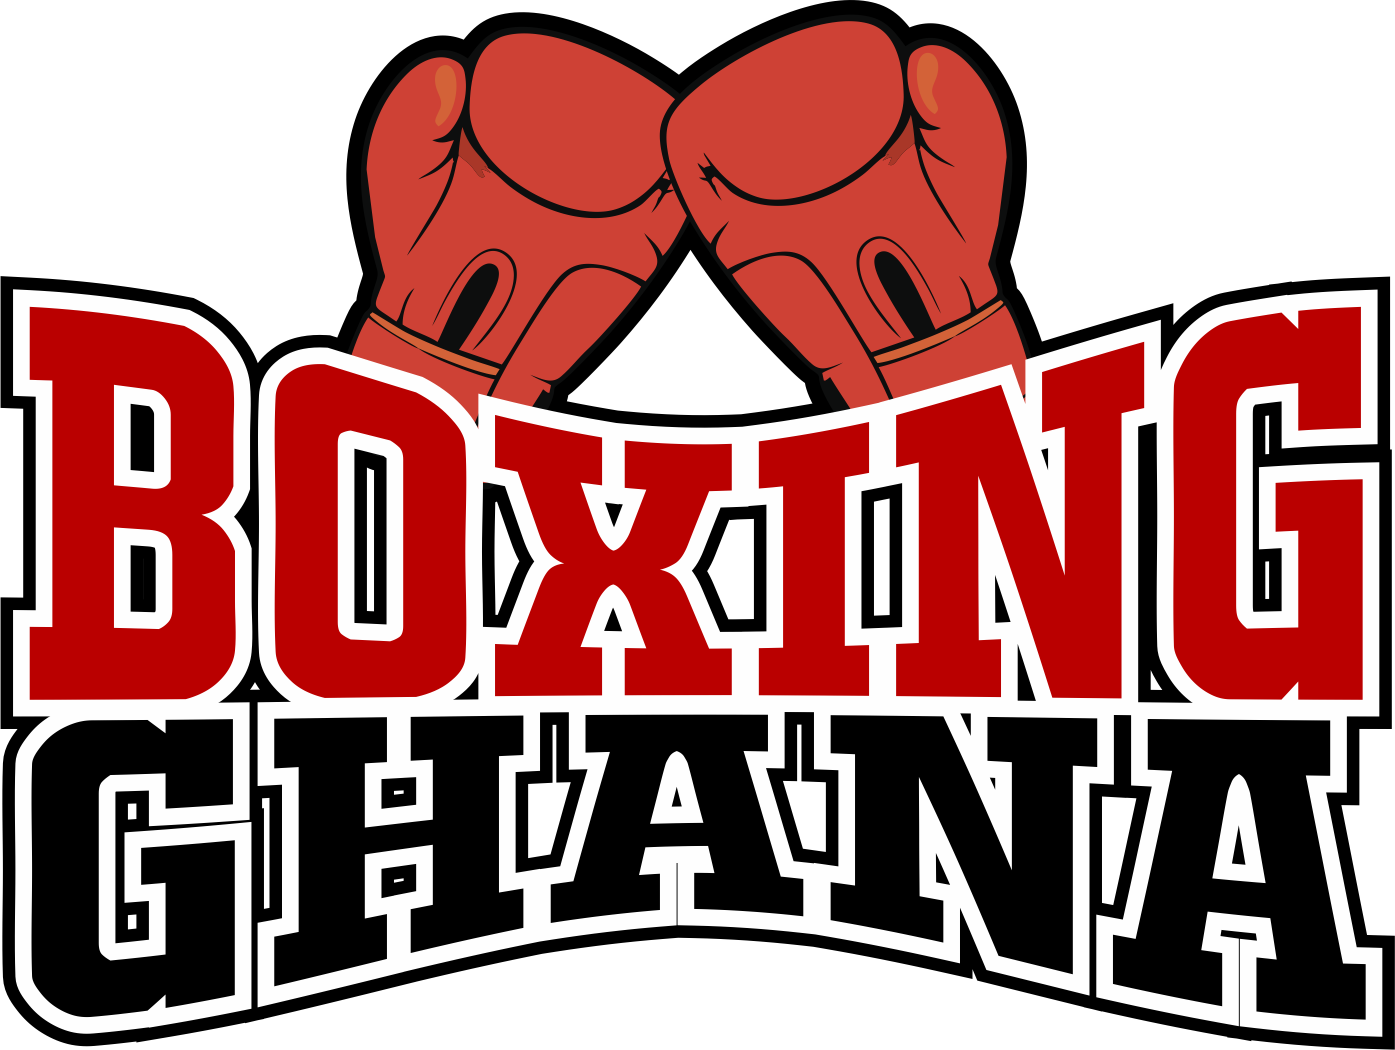 Official website and most authoritative platform for Ghana boxing news and more